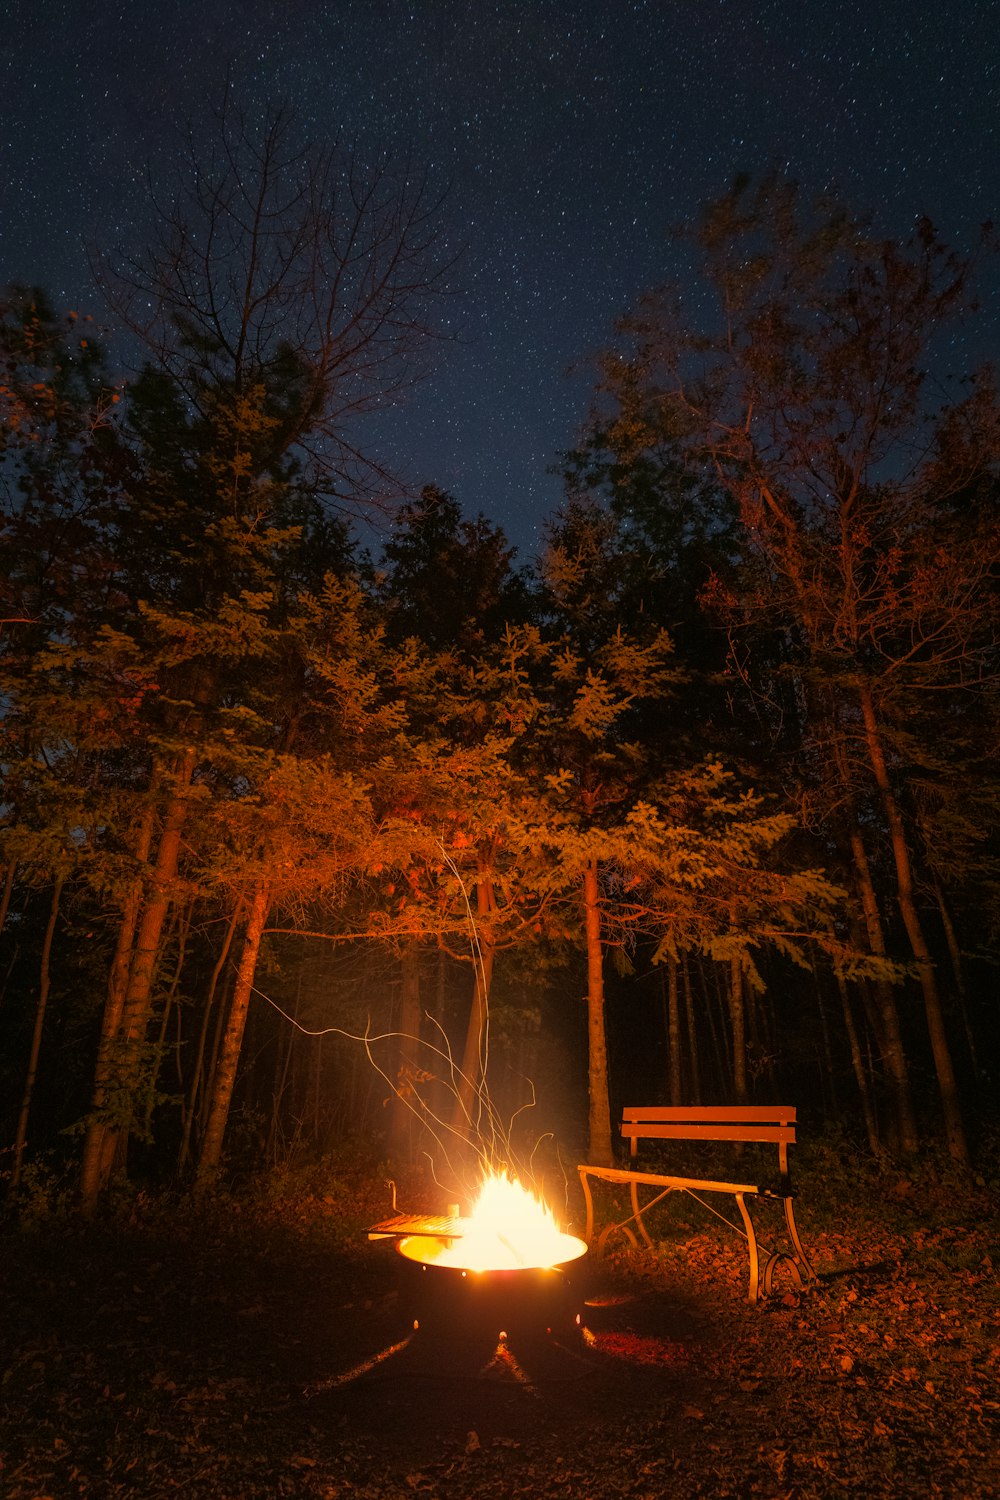 brown wooden bench near bonfire during night time